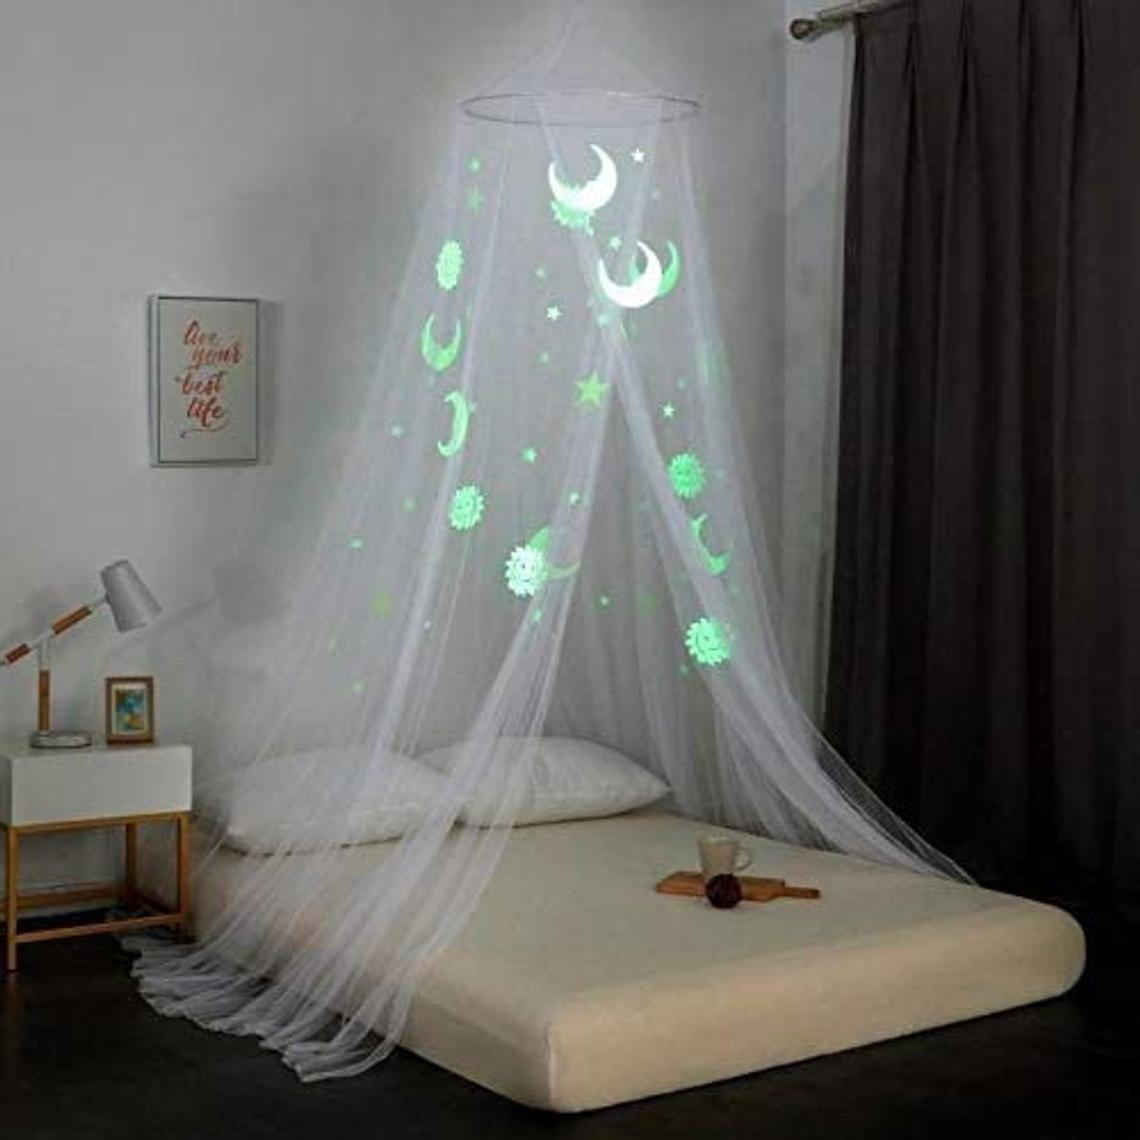 Full Q K CK Halloween Glow in The Dark Bed Canopy Mosquito Net Fits Crib,Twin 